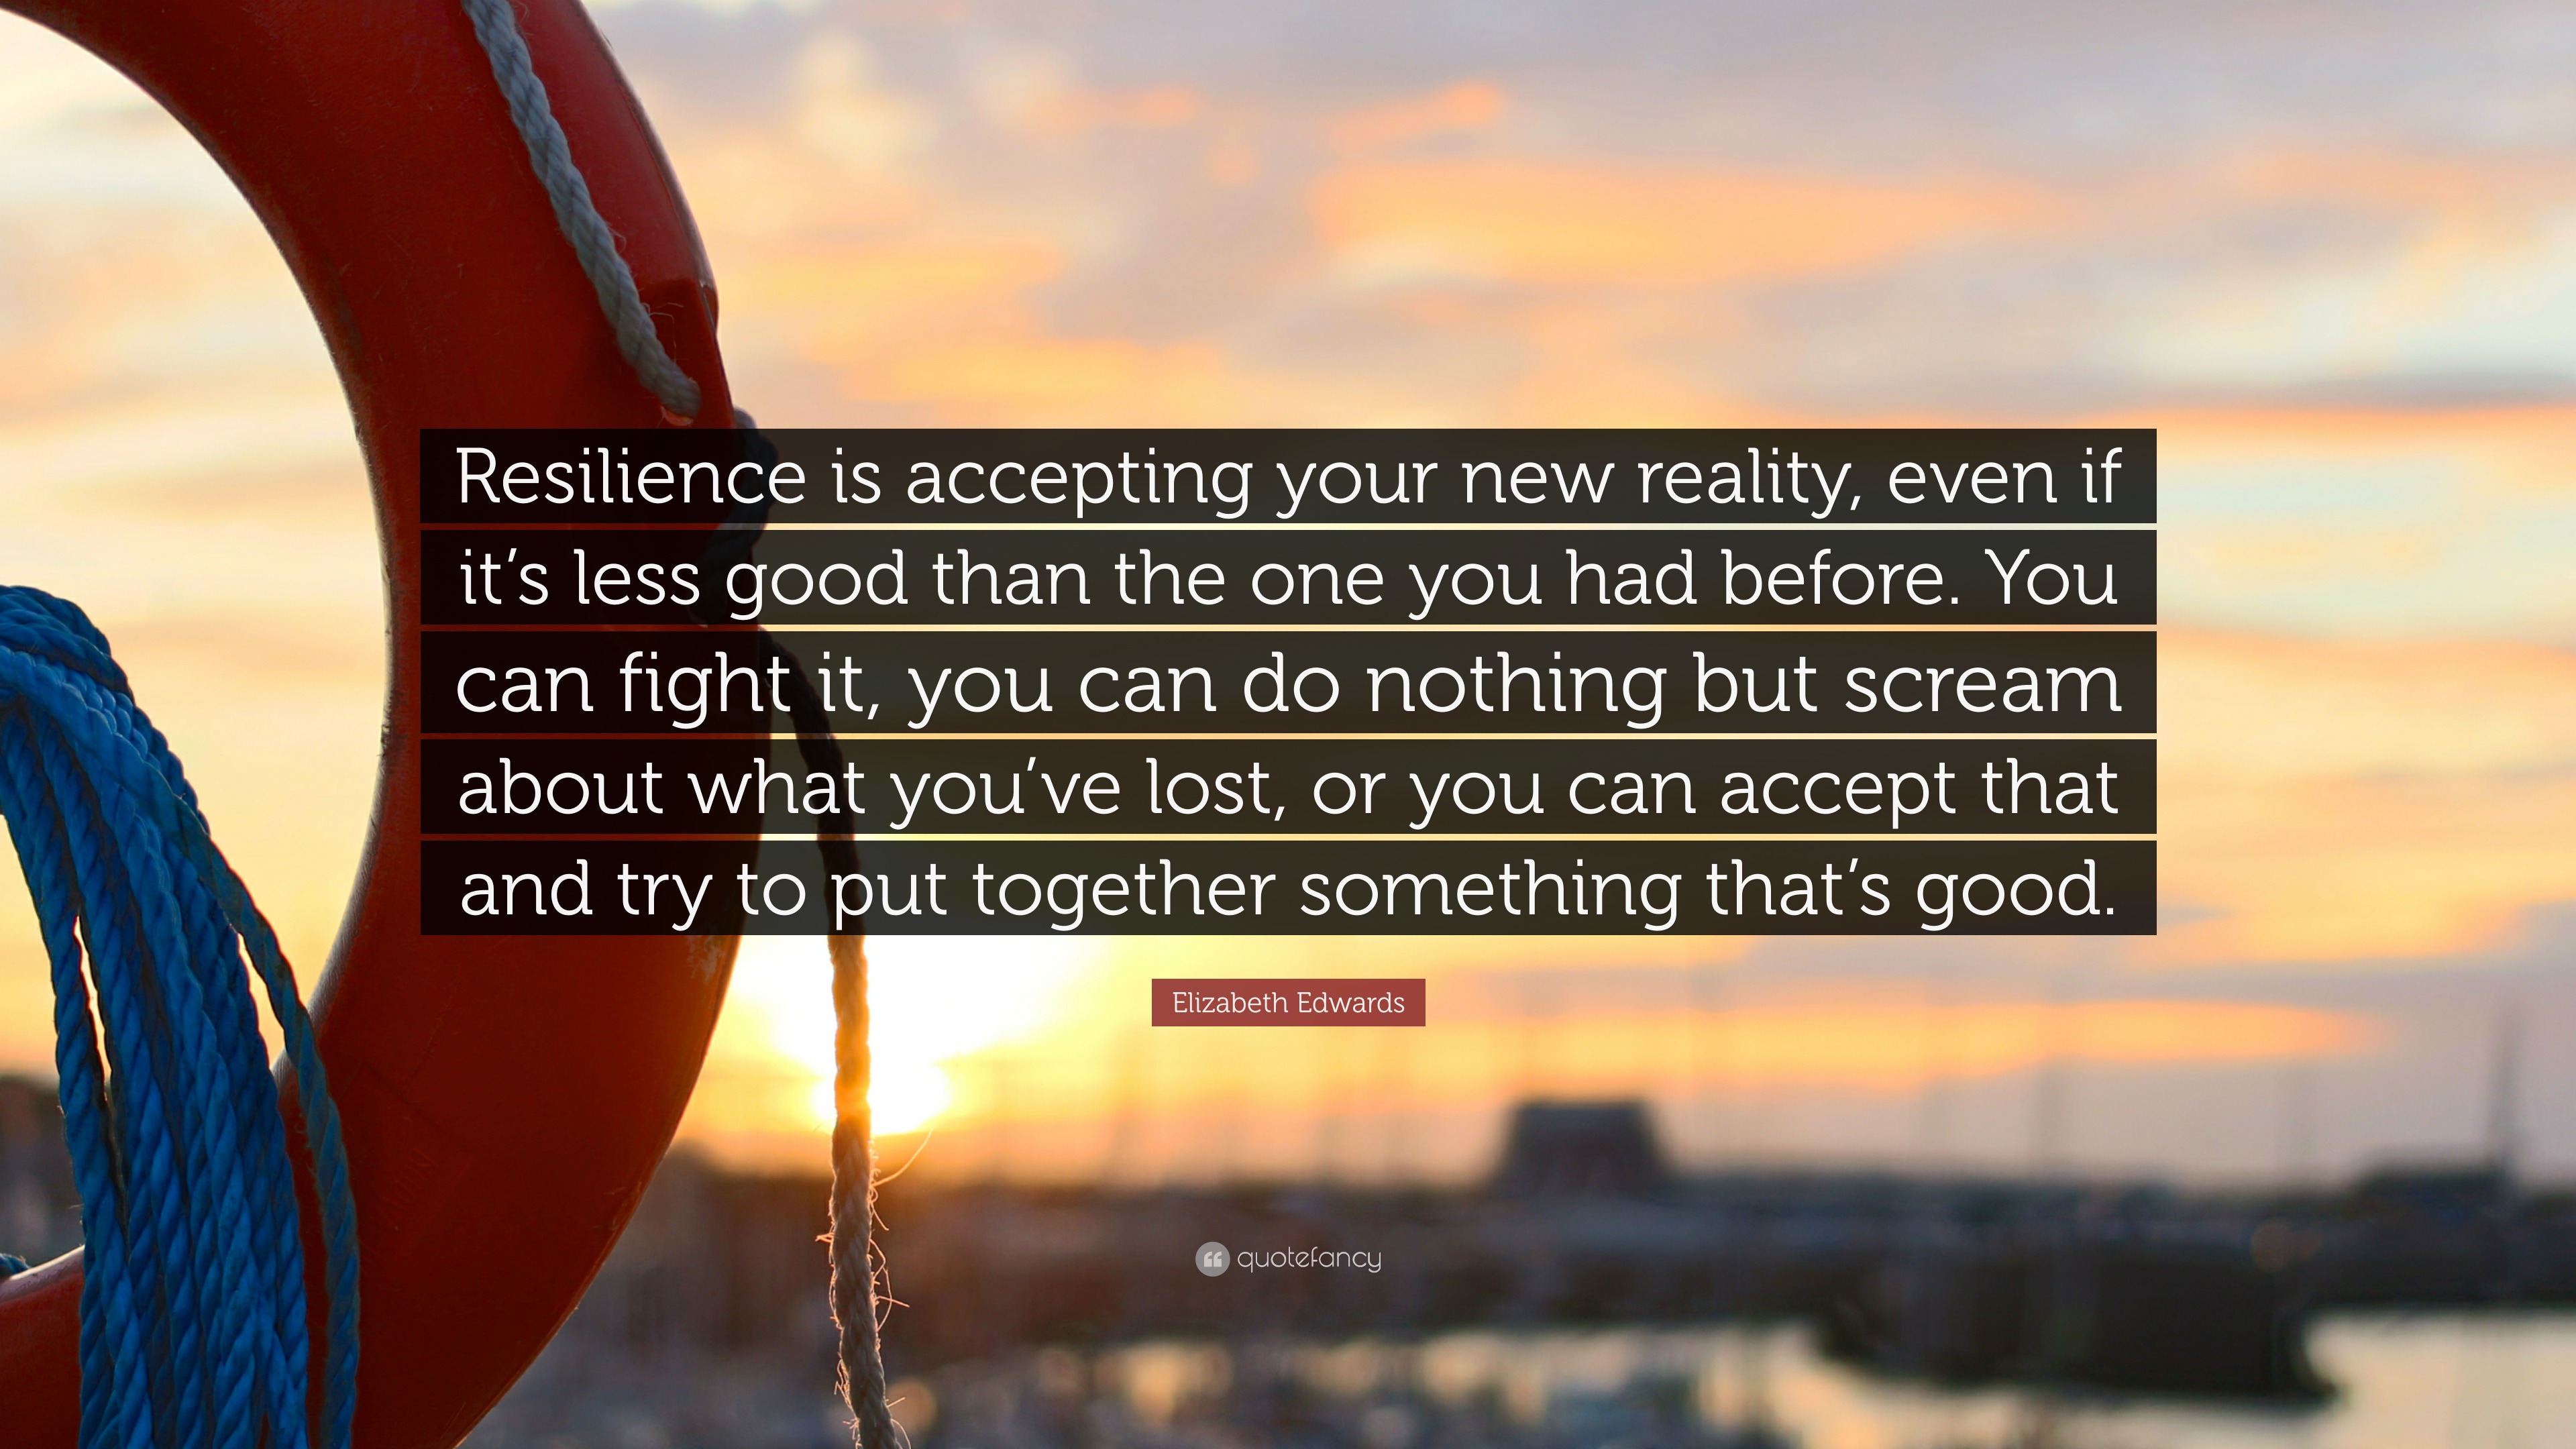 Elizabeth Edwards Quote: “Resilience is accepting your new reality